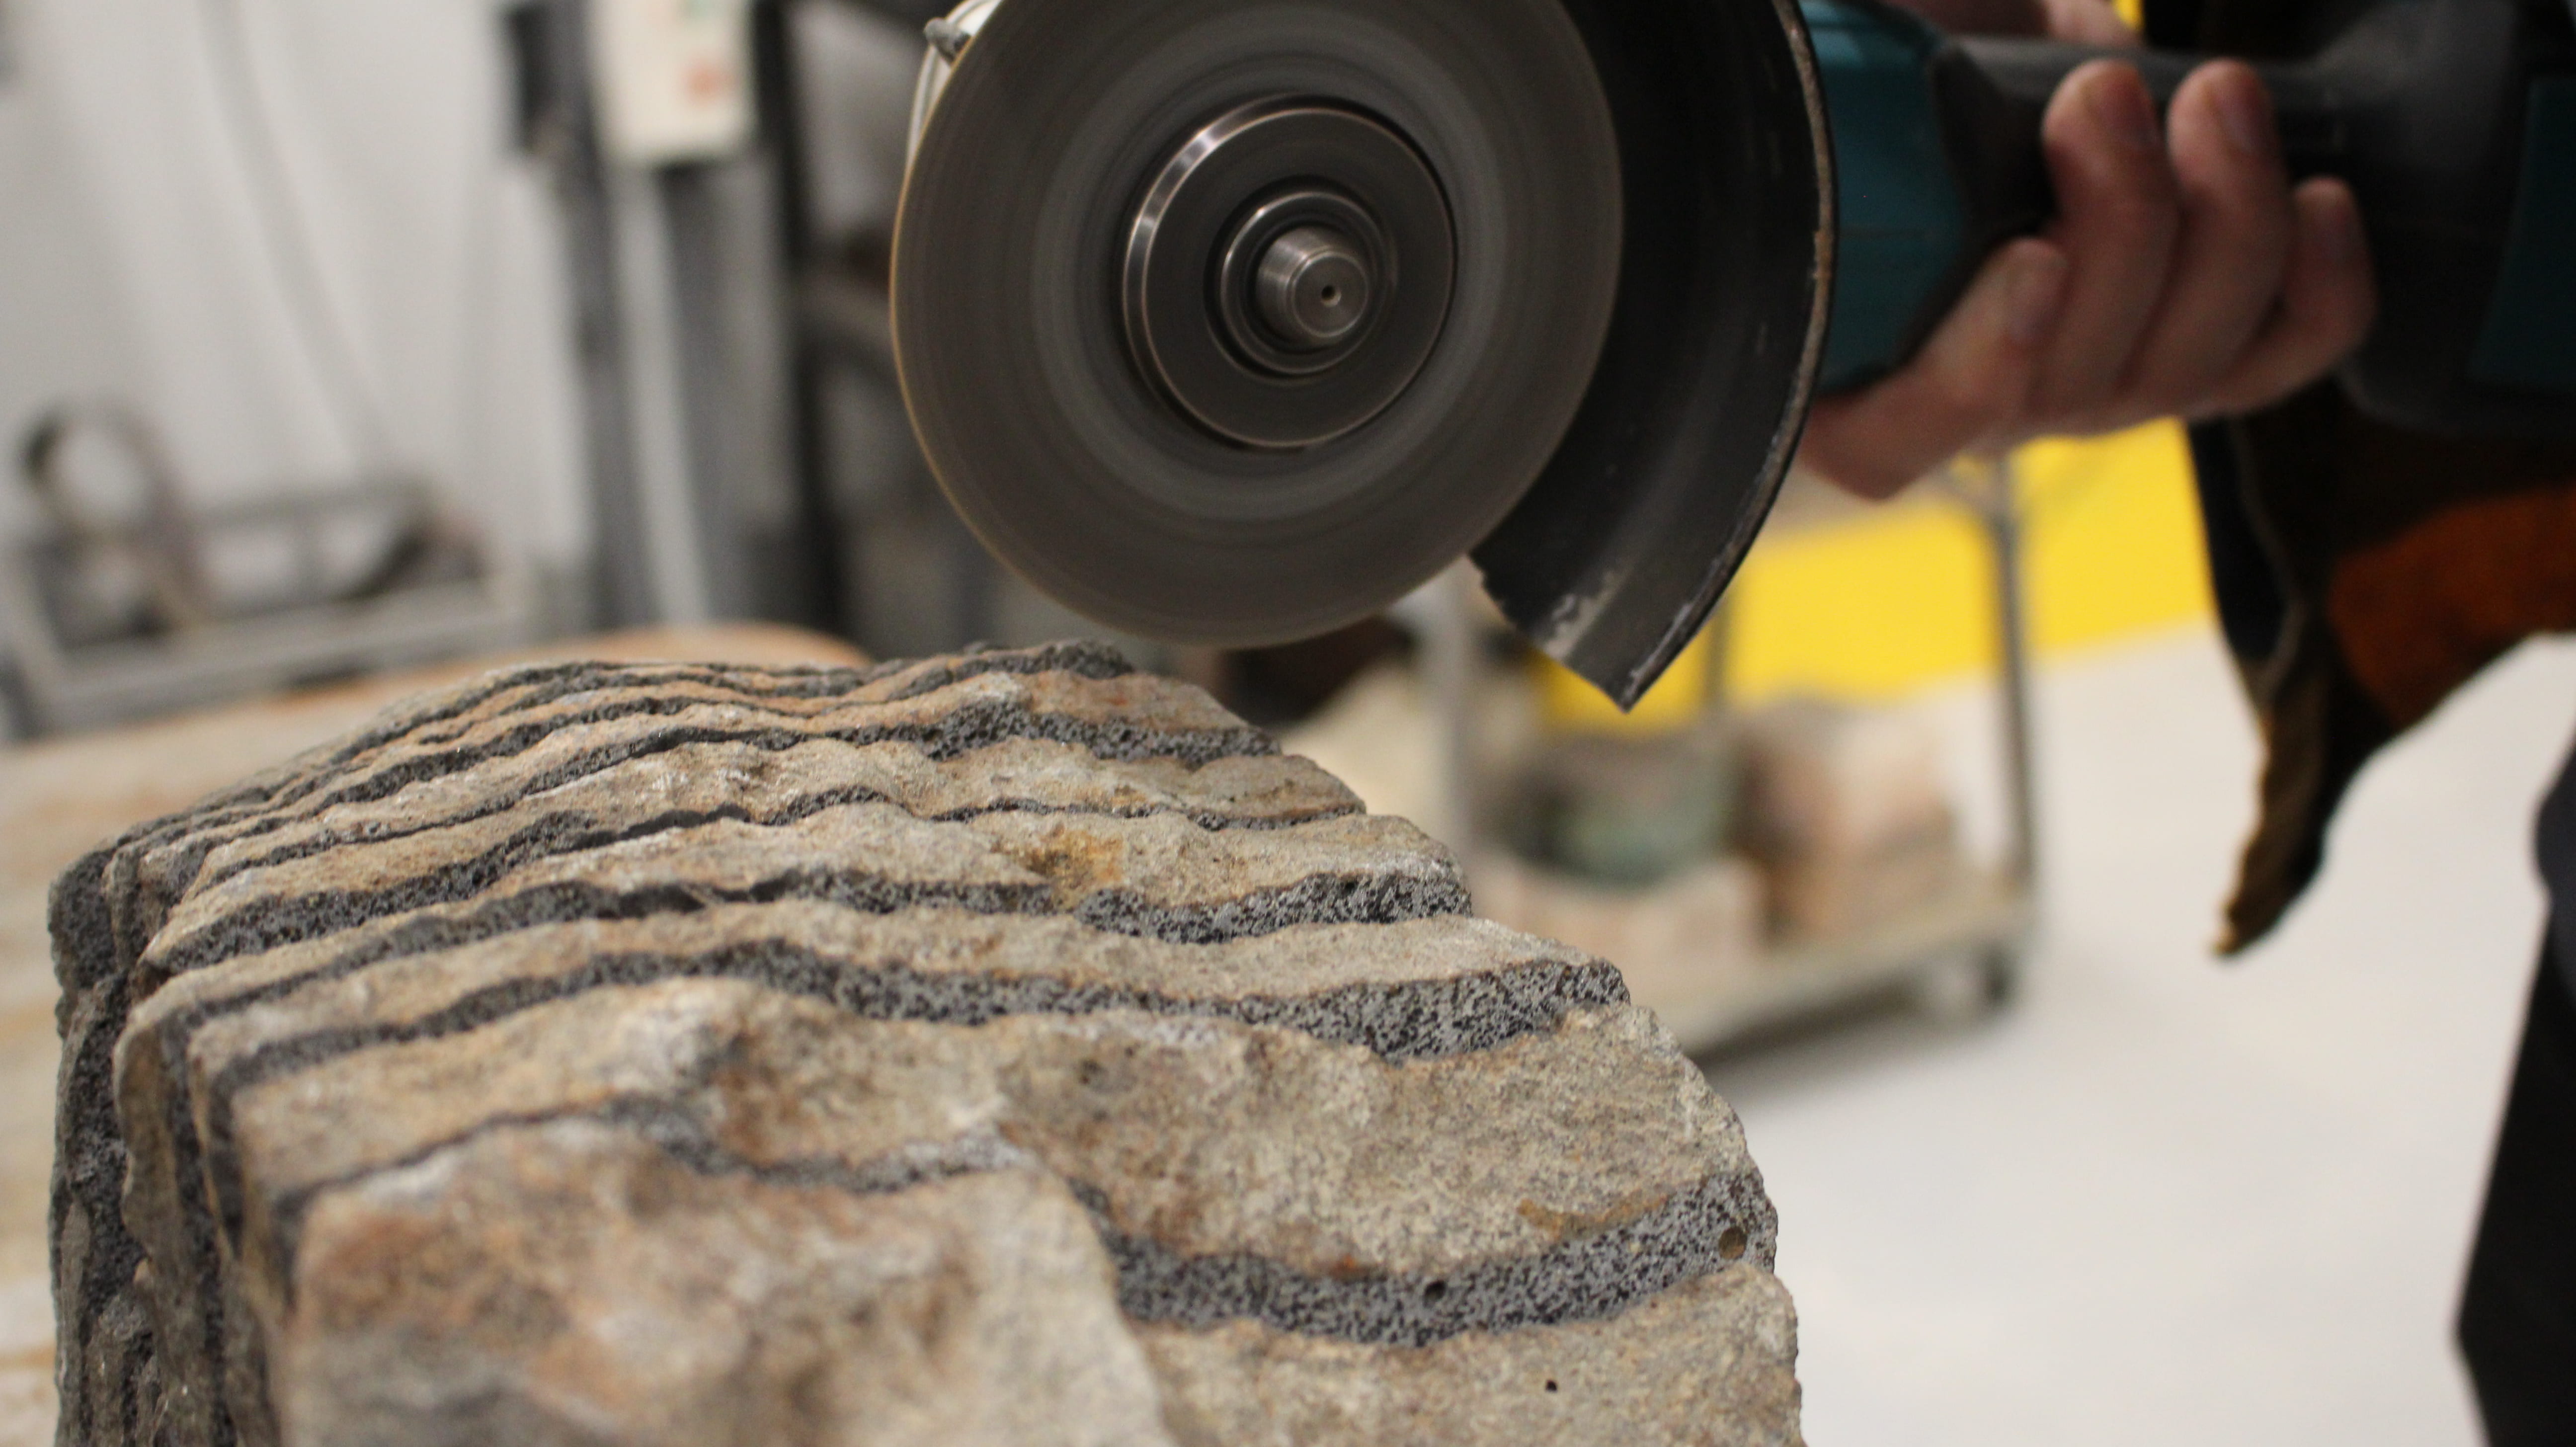 A photograph of an angle grinder positioned above a slotted stone block. In the background is workshop imagery.